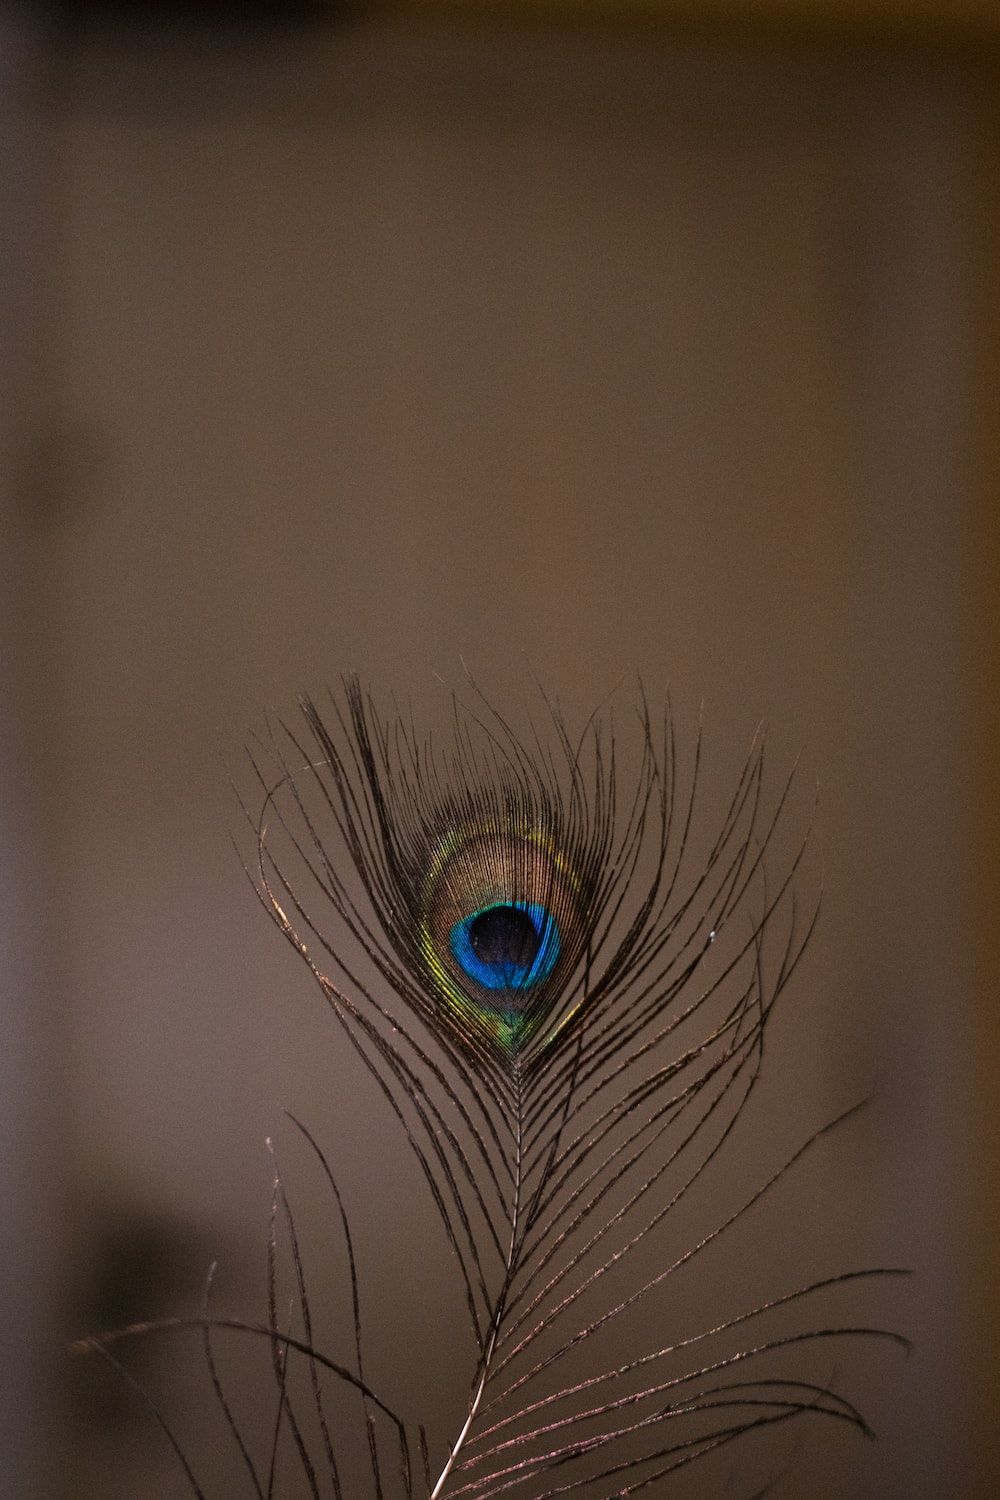 Peacock feather in close up photography photo